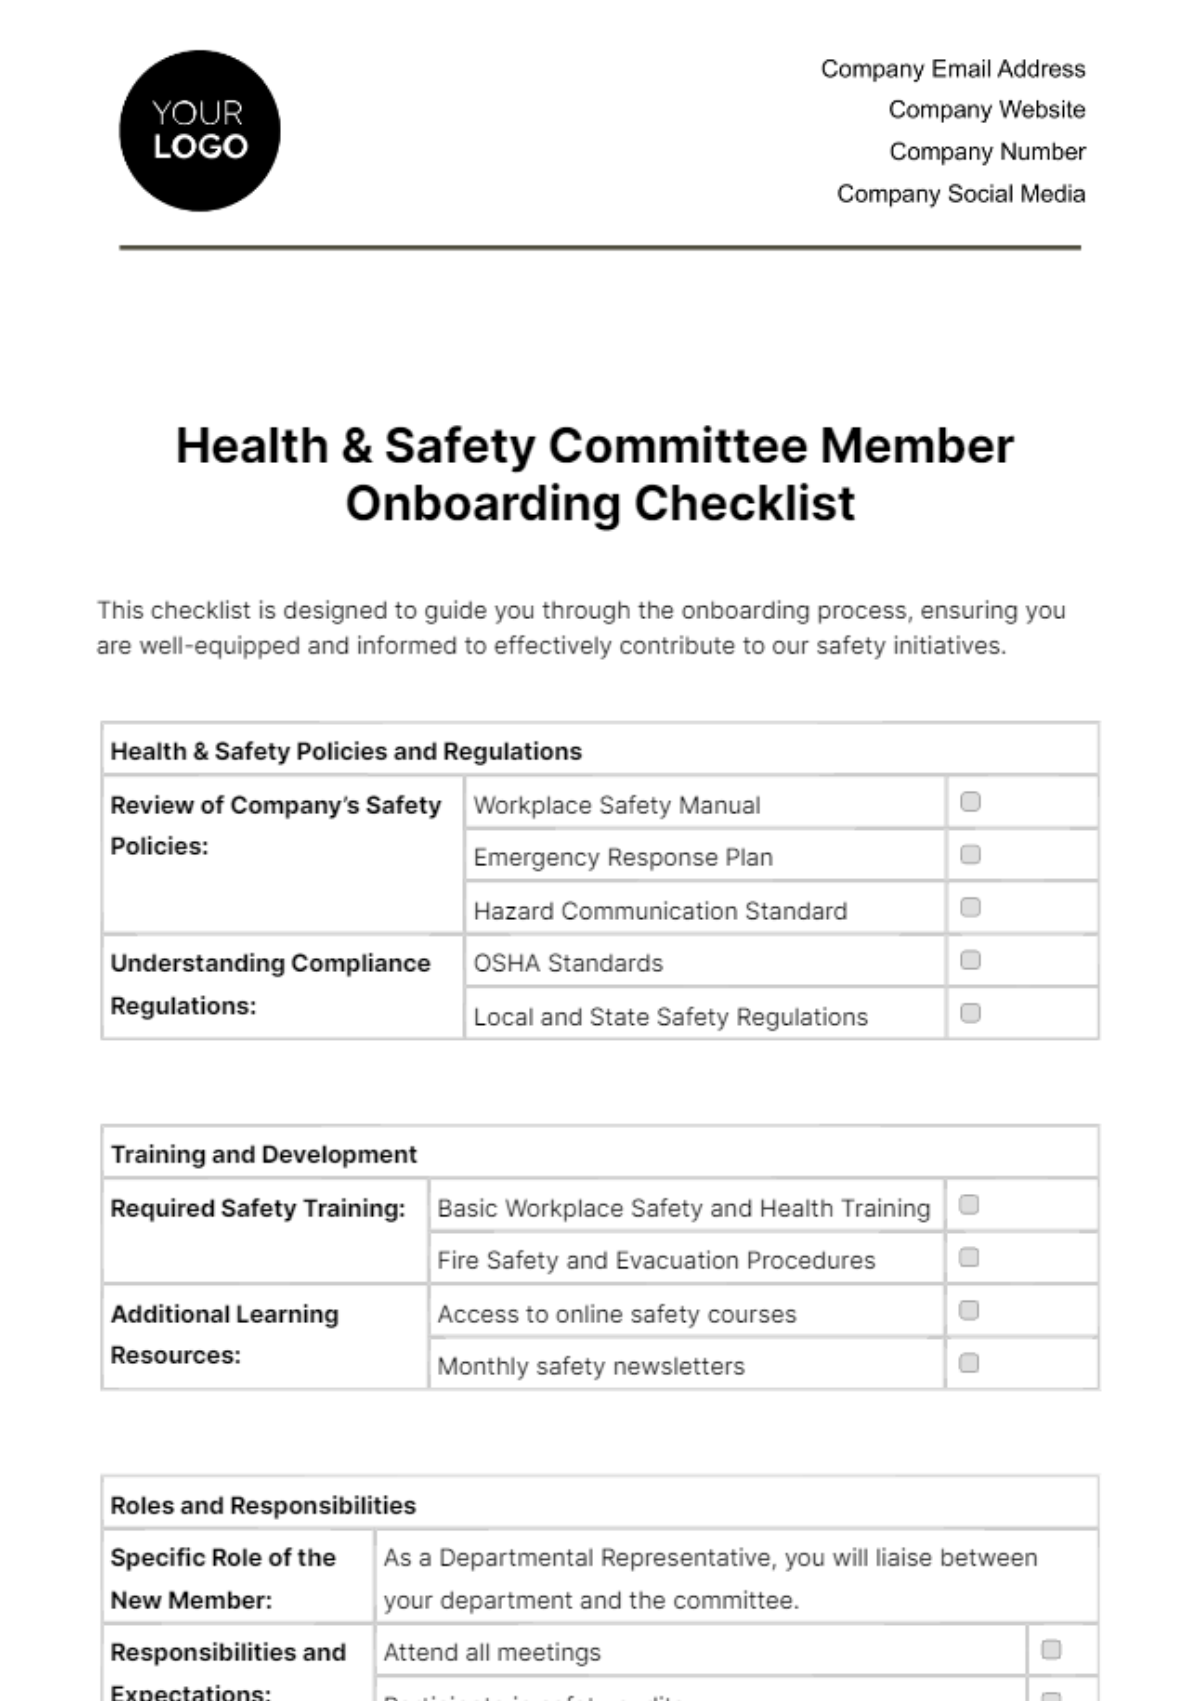 Health & Safety Committee Member Onboarding Checklist Template